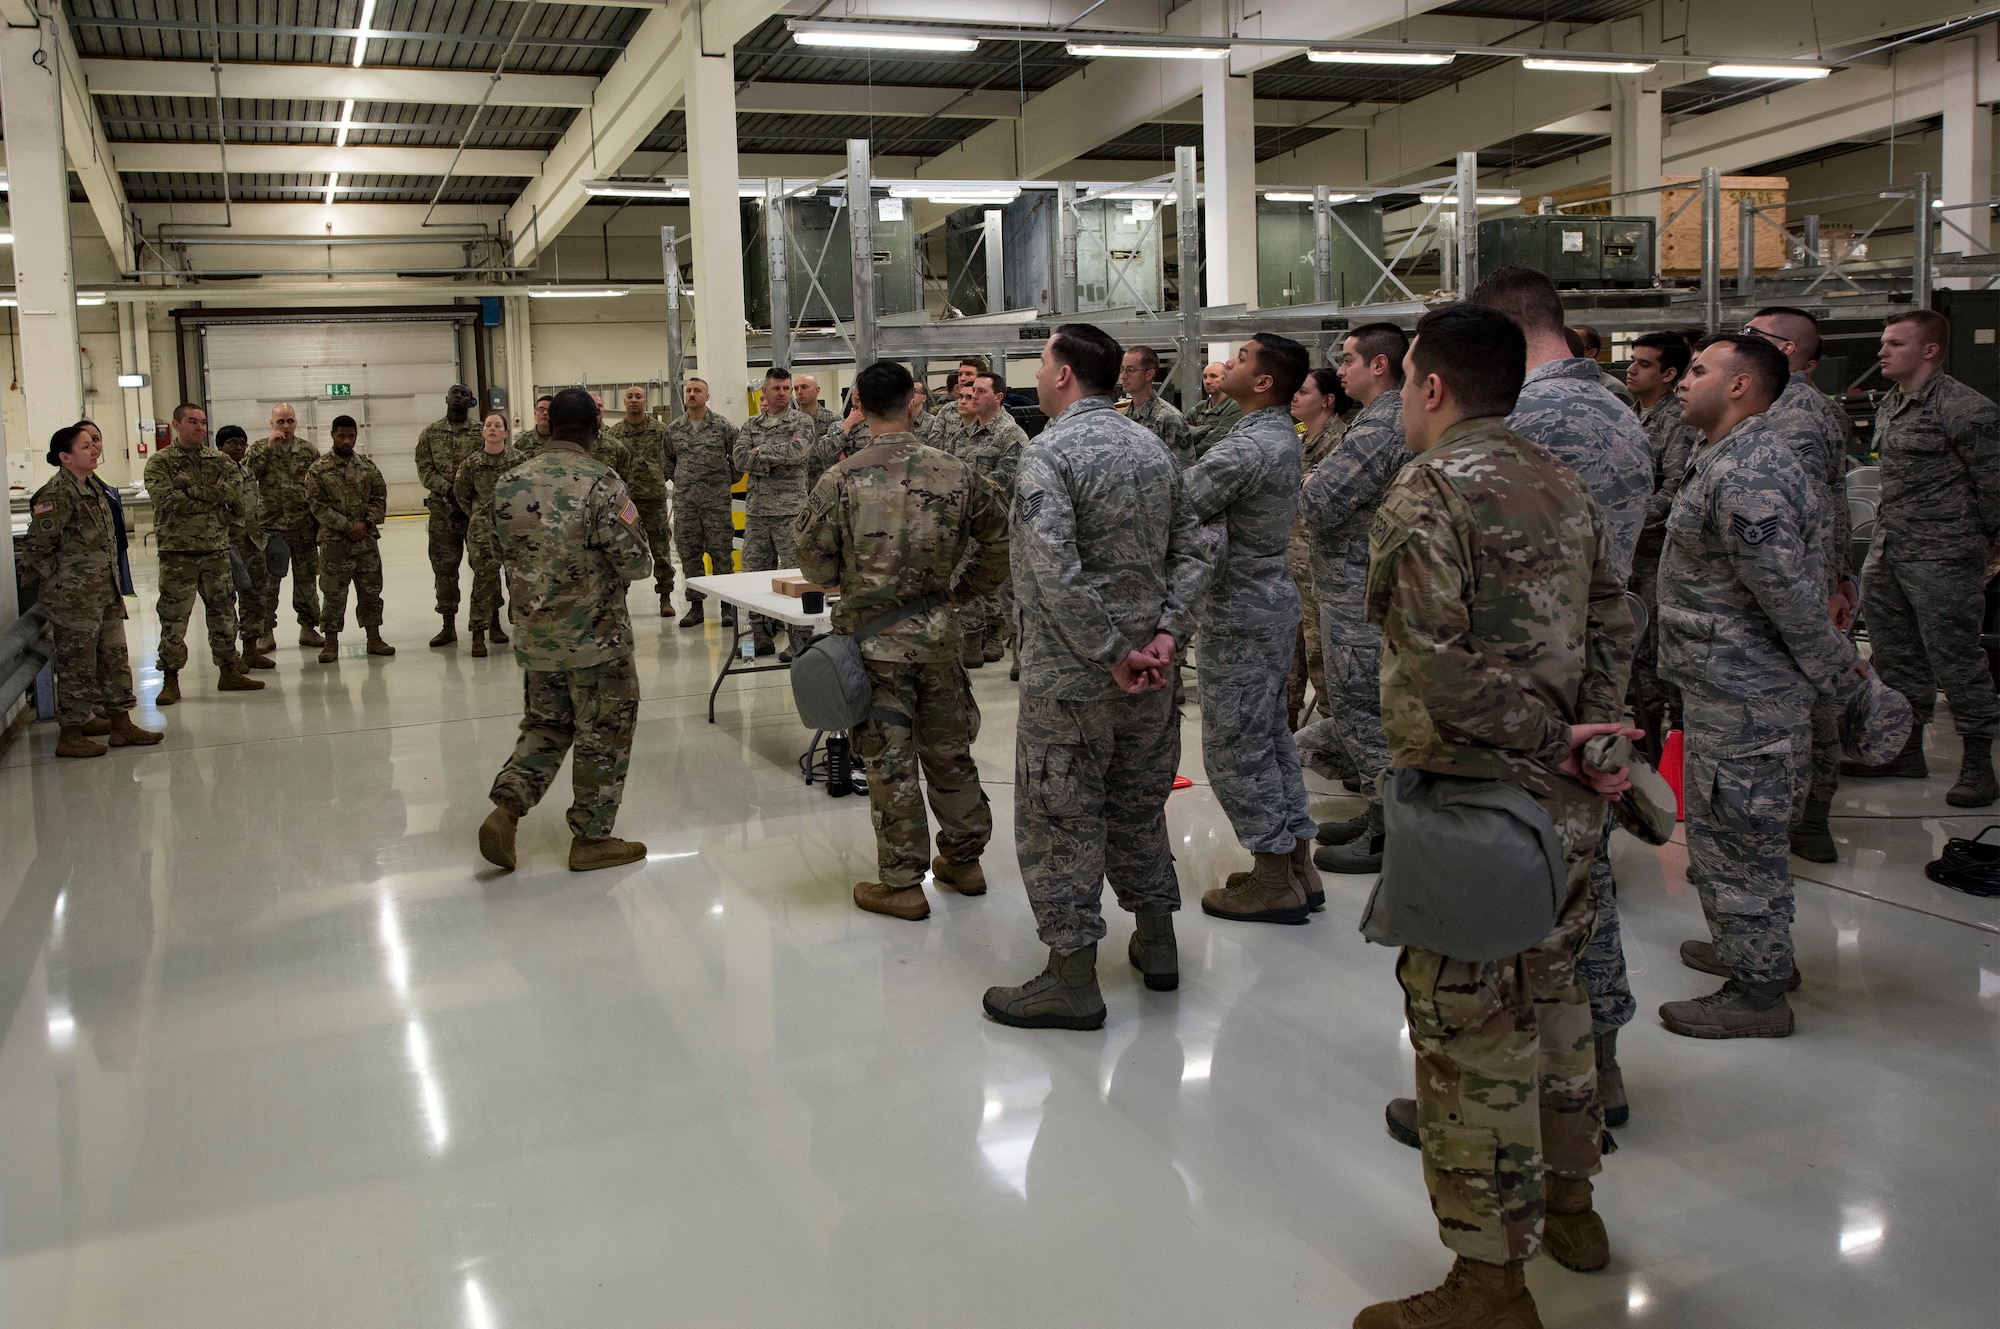 U.S. Army Col. U.L. Armstrong Jr., 773rd Civil Support Team commander, briefs the 786th Civil Engineer Squadron and 773rd Civil Support Team on the chemical, biological, radiological, and nuclear equipment demonstration on Ramstein Air Base, Germany, March 12, 2018. The purpose of the demonstration was to display equipment and procedures used during a CBRN incident response.